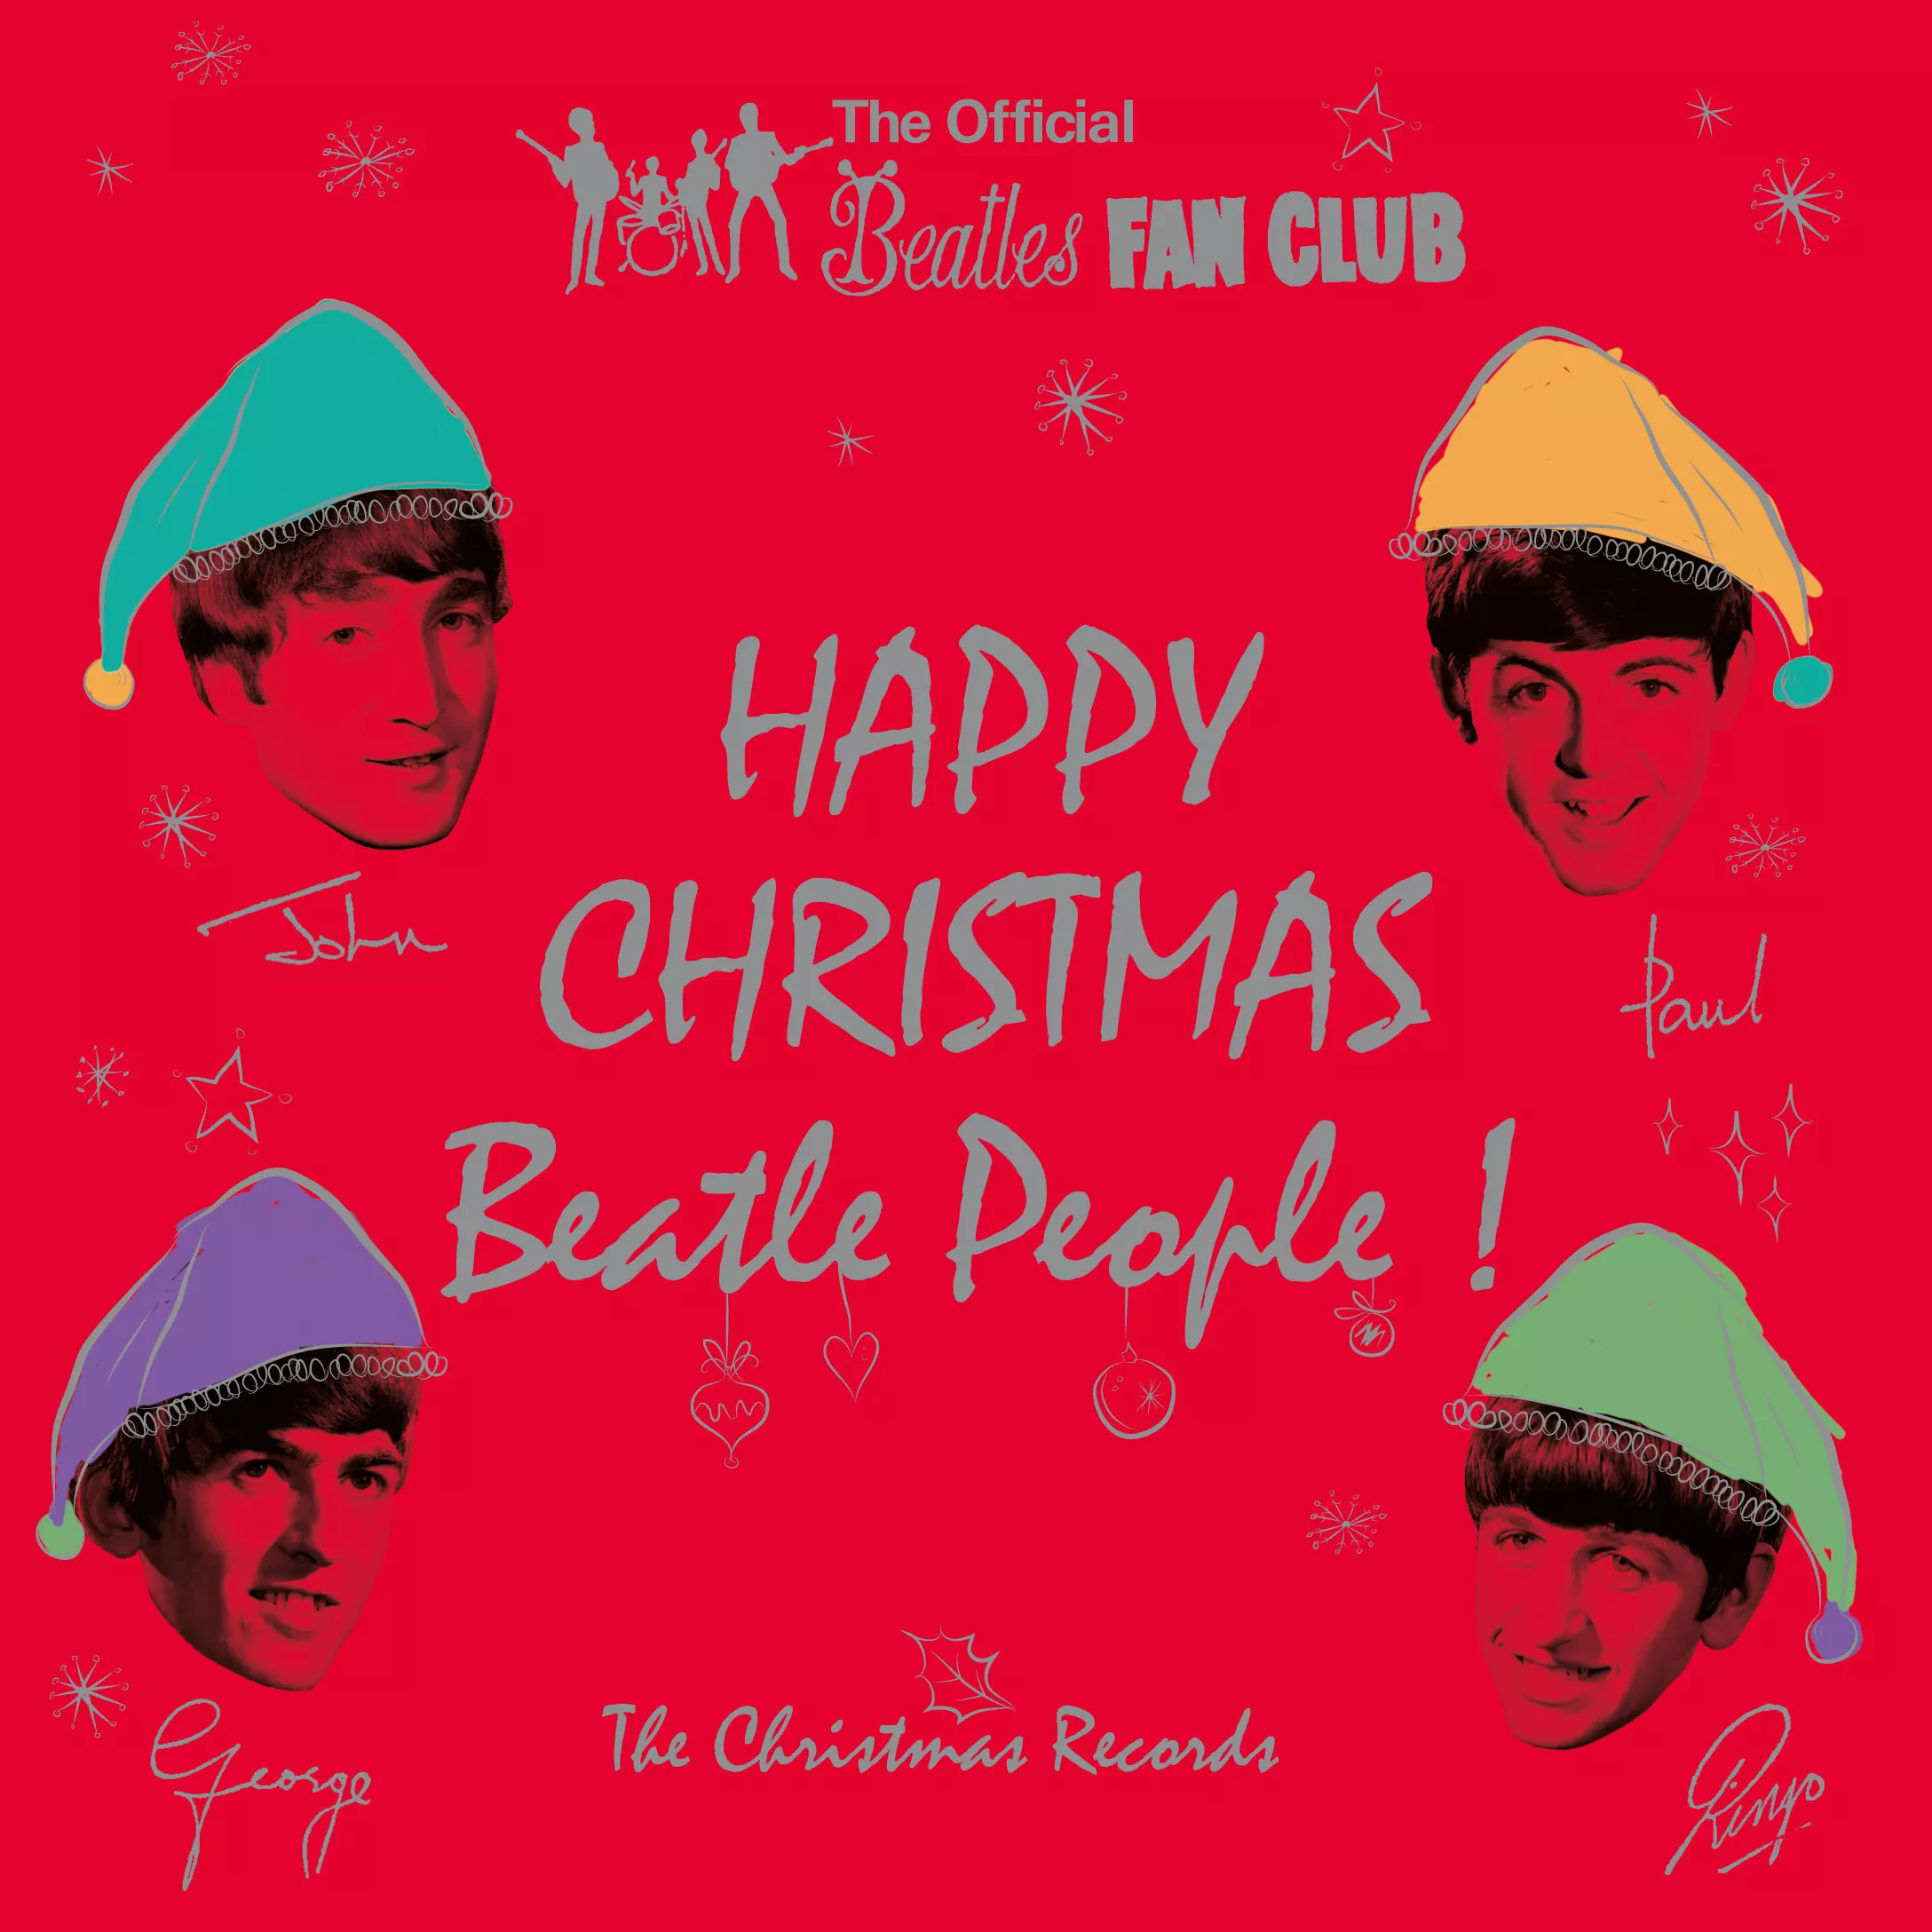 The Christmas Records - The Beatles